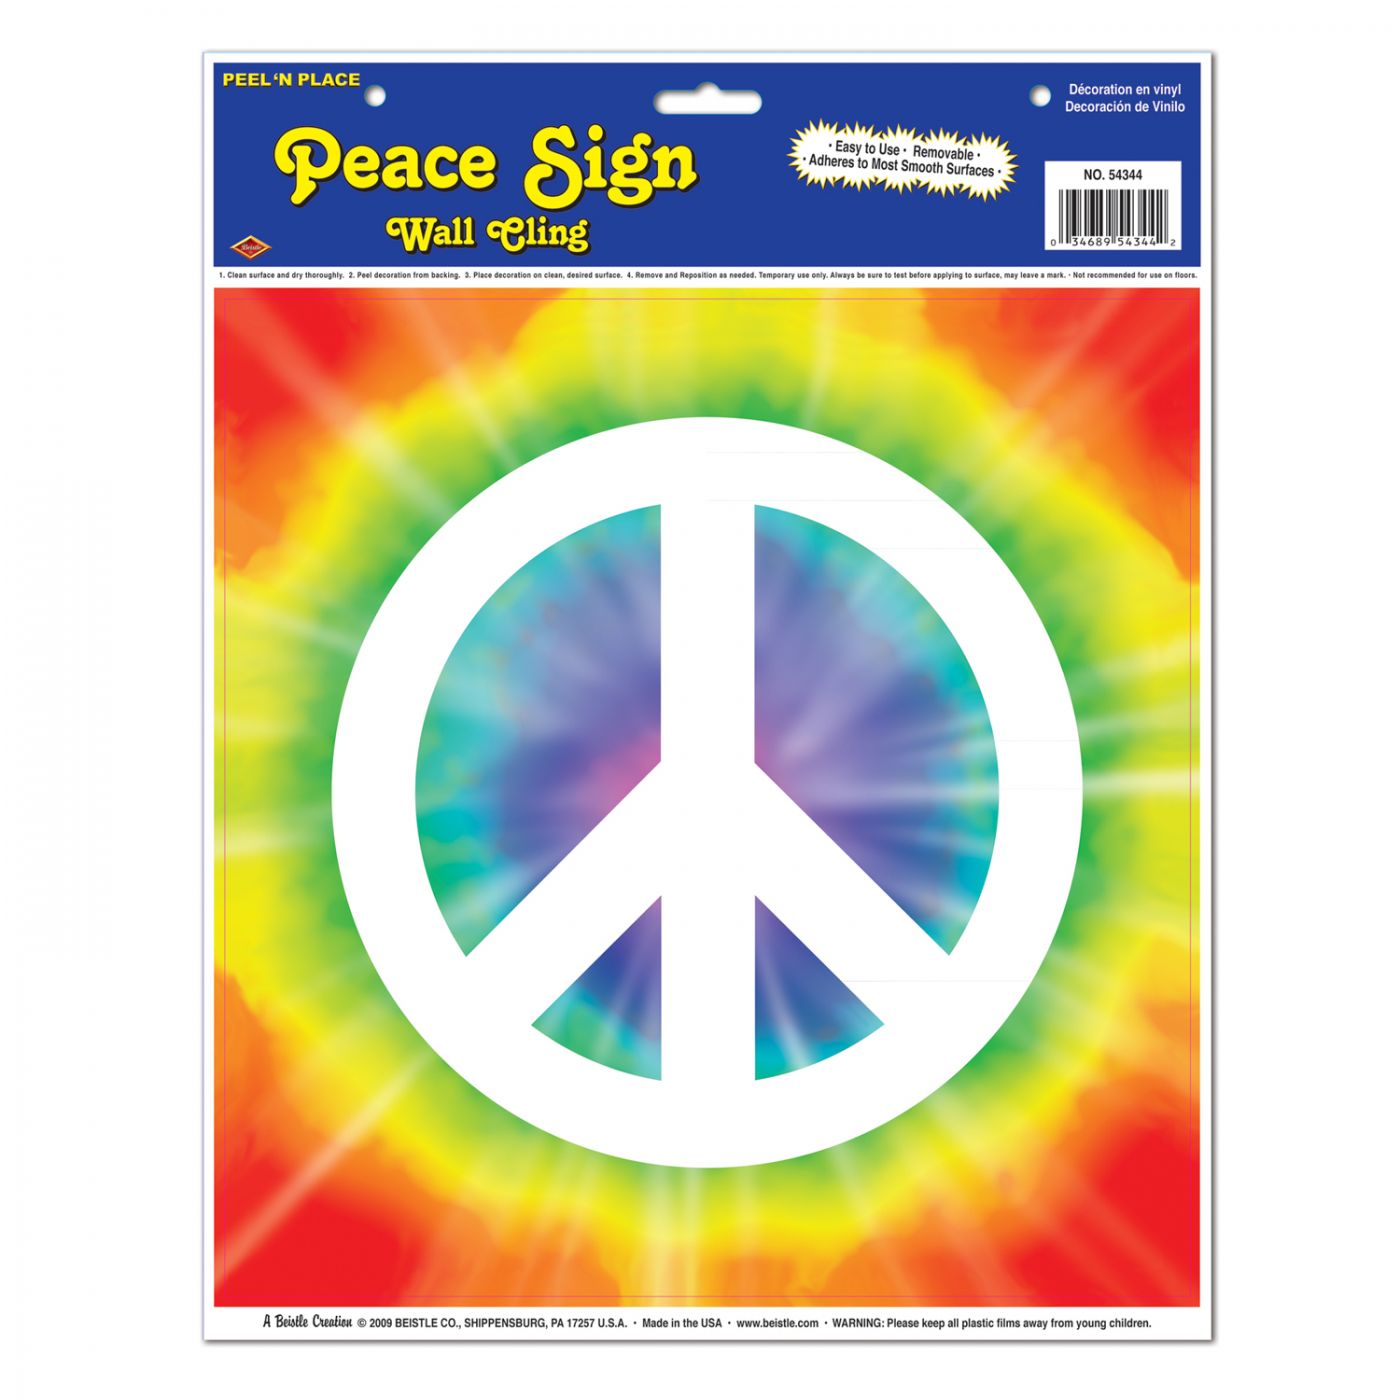 Peace Sign Peel 'N Place image